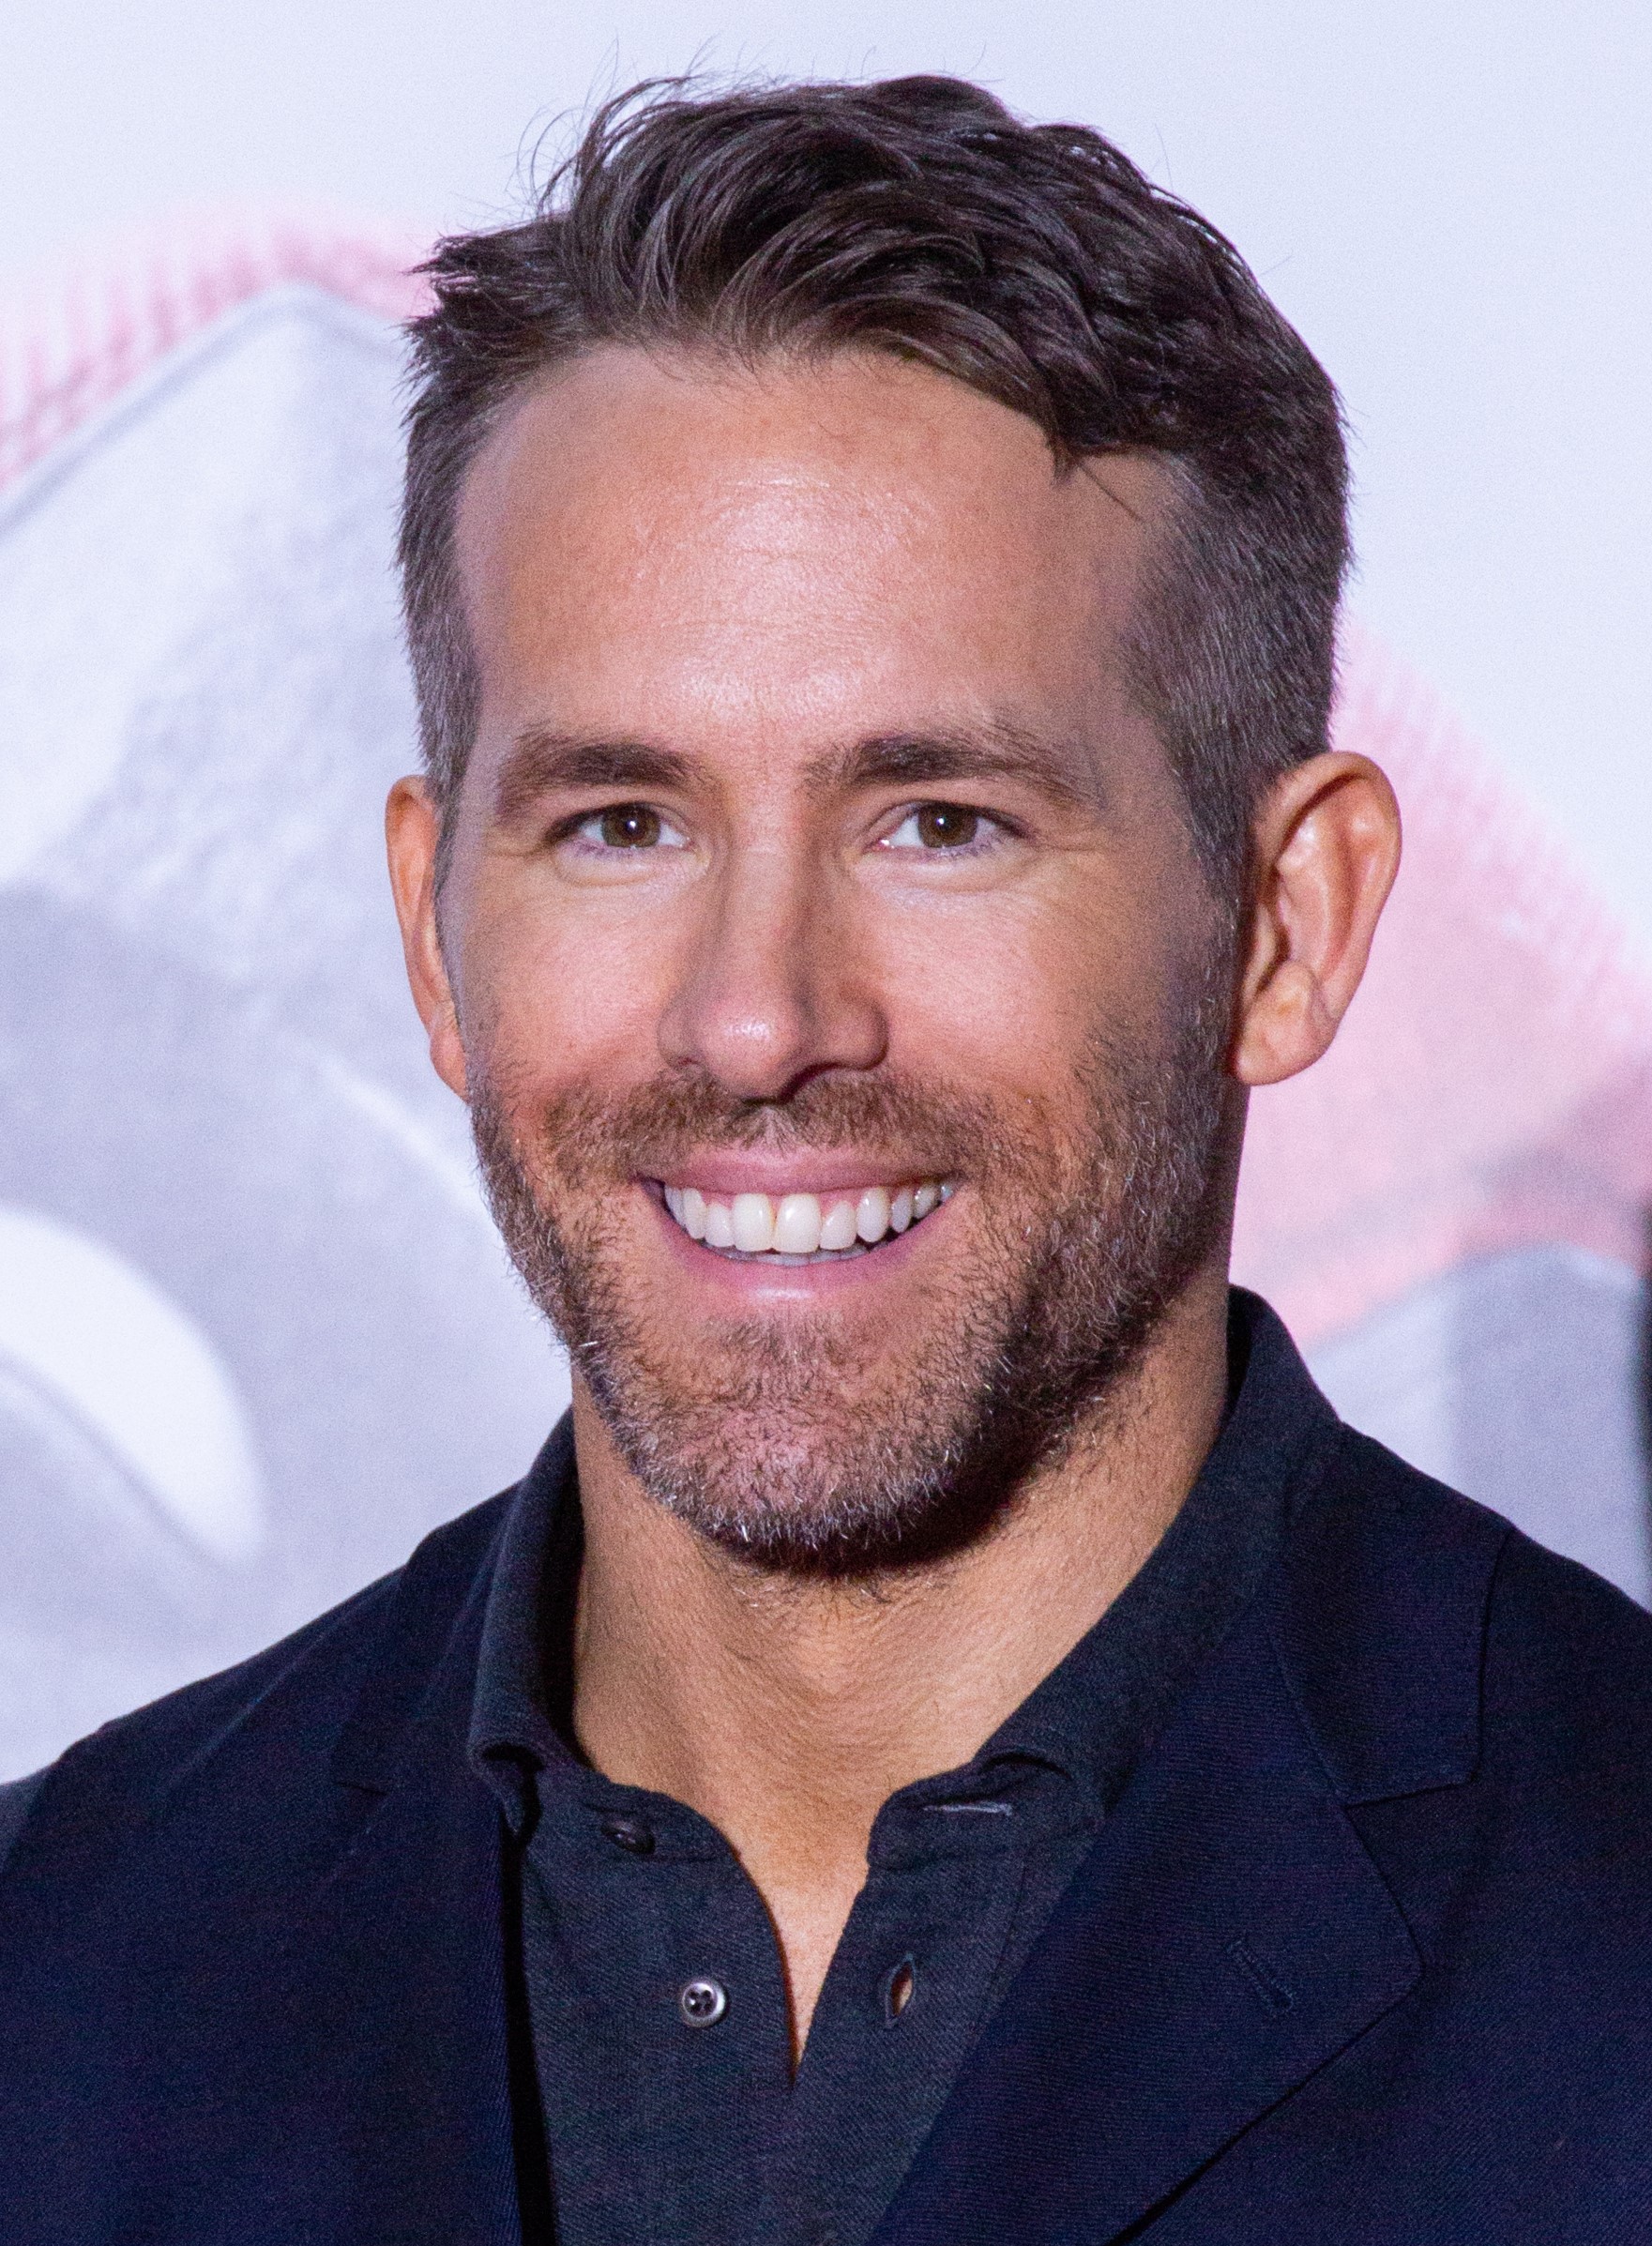 Ryan Reynolds Created A Video Of The Relationship That RUINED 2020 – PLUS your first listen to Taylor Swifts re-recorded music